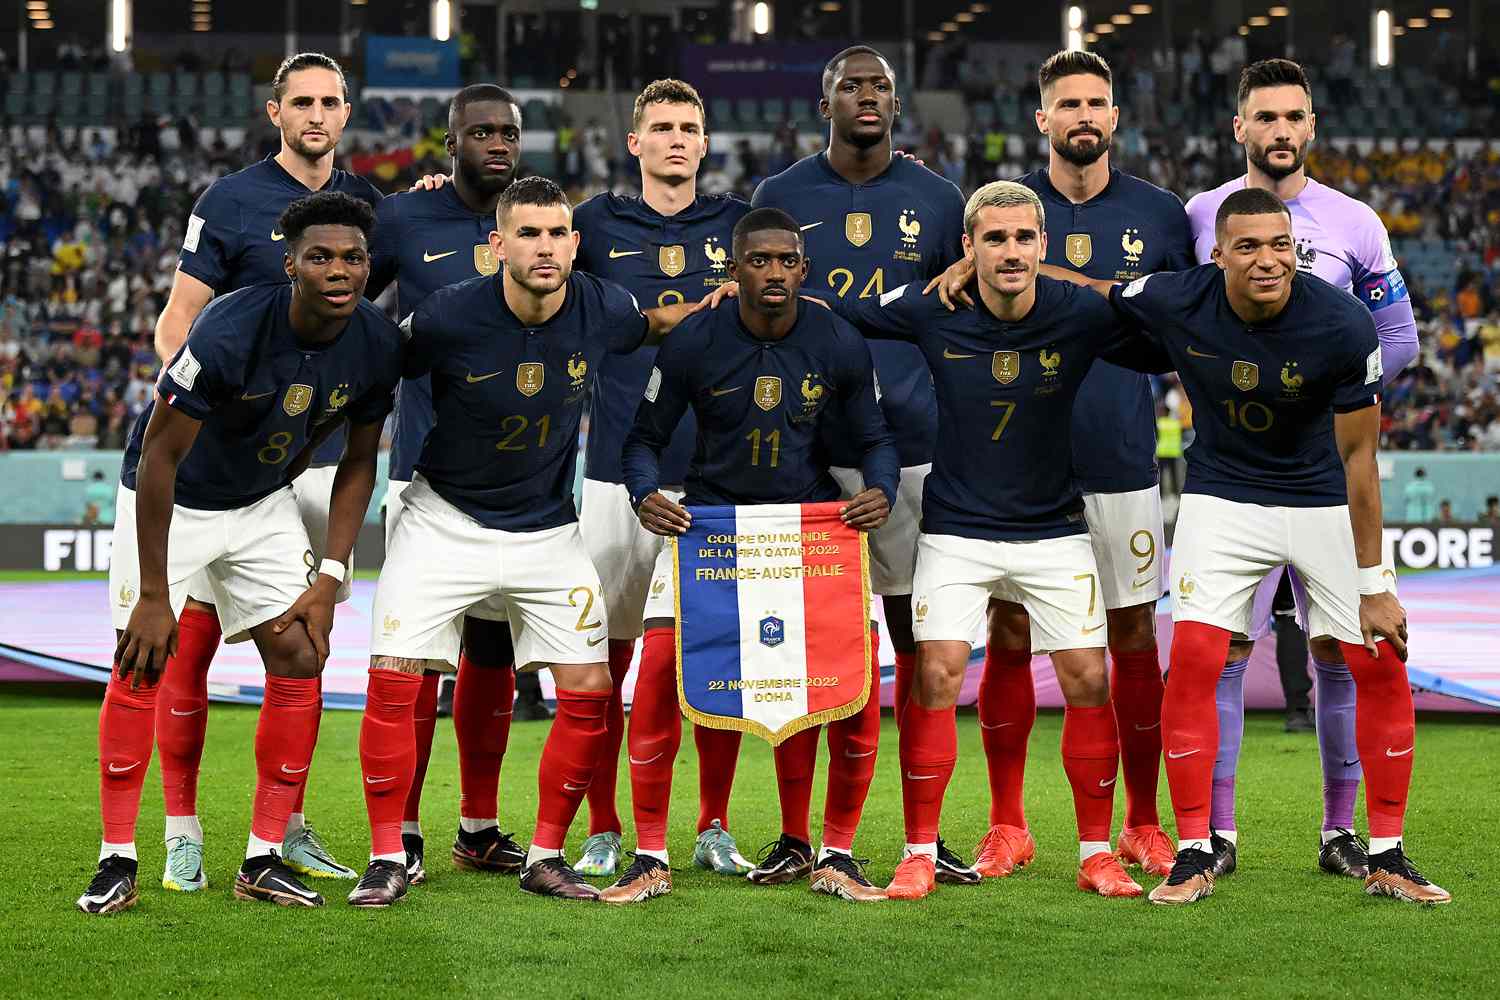 Germany vs France Live: Amid a poor run of form, Germany looks to find some confidence with an international friendly against France.